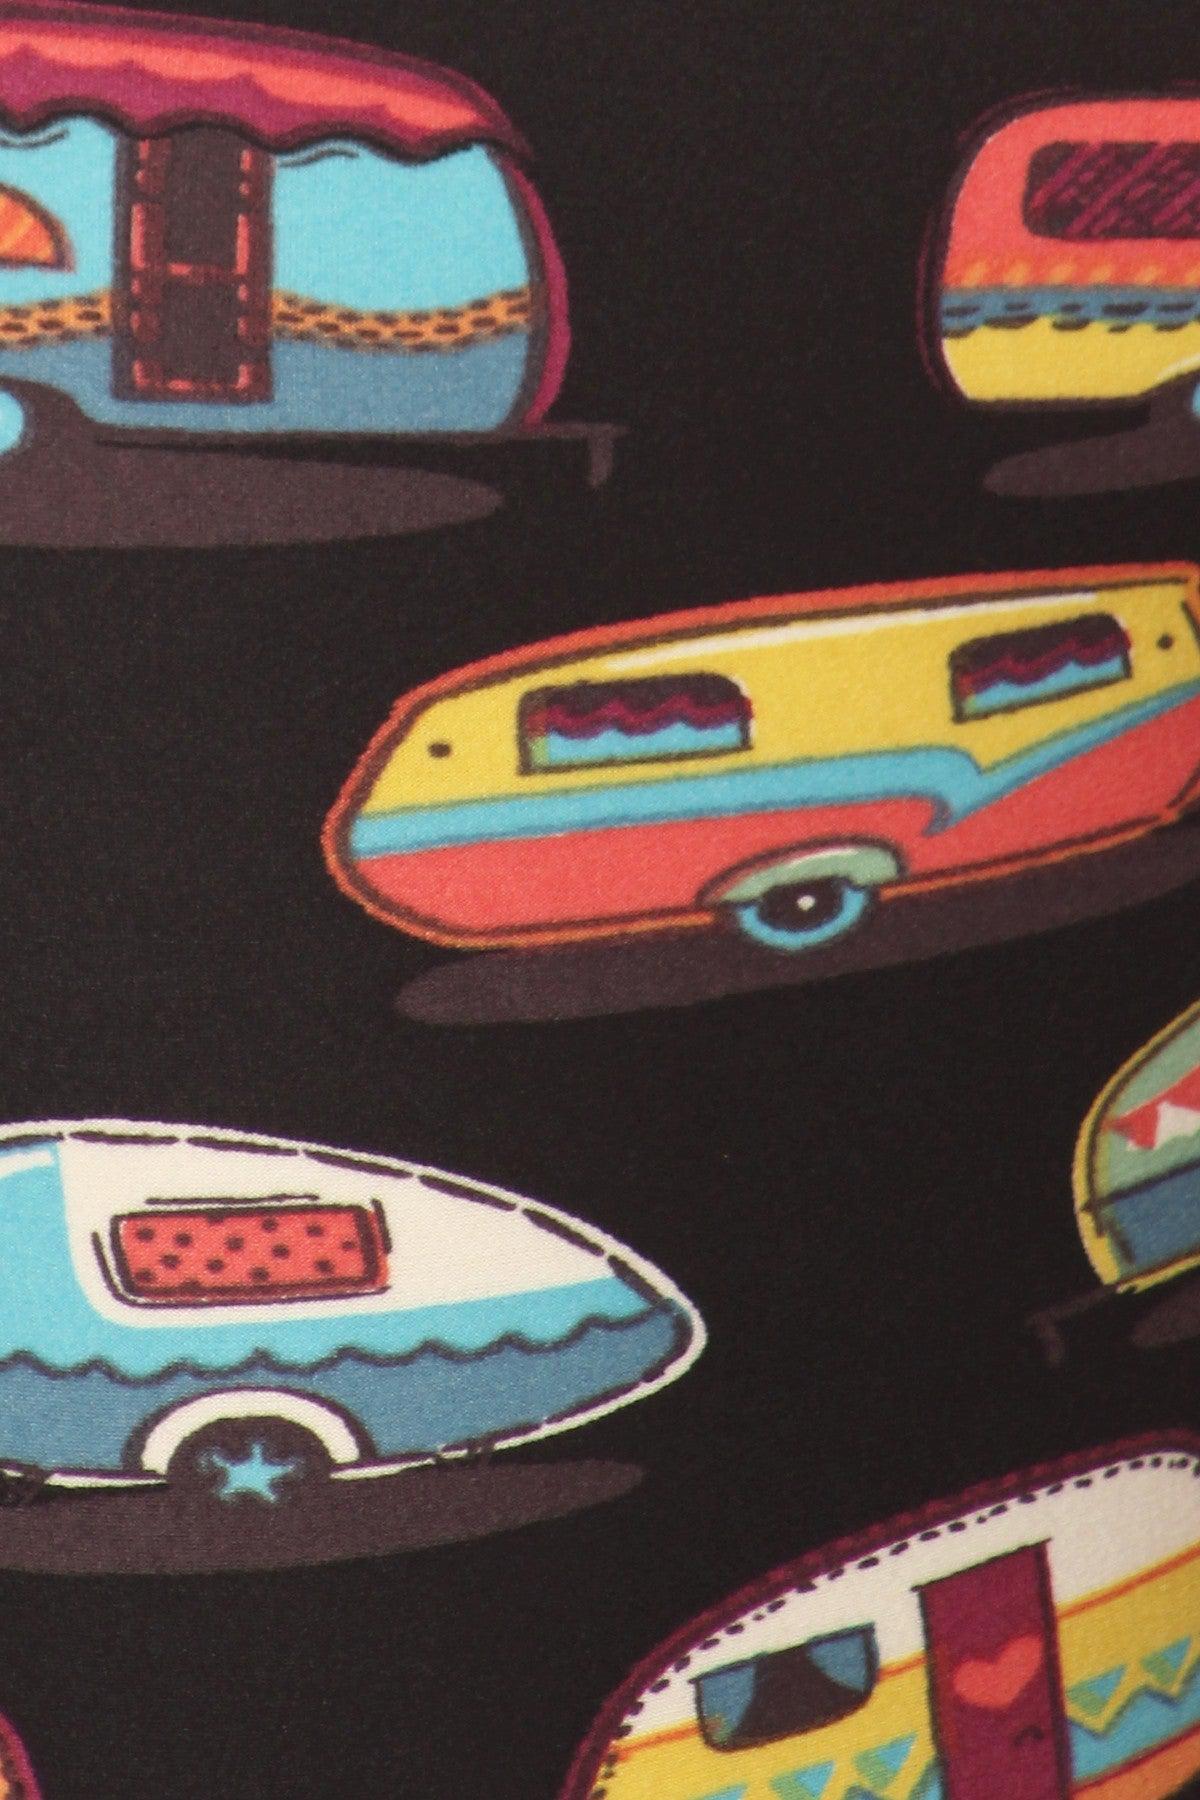 Multicolored Campers Printed, High Waisted Leggings In A Fit Style, With An Elastic Waistband Blue Zone Planet